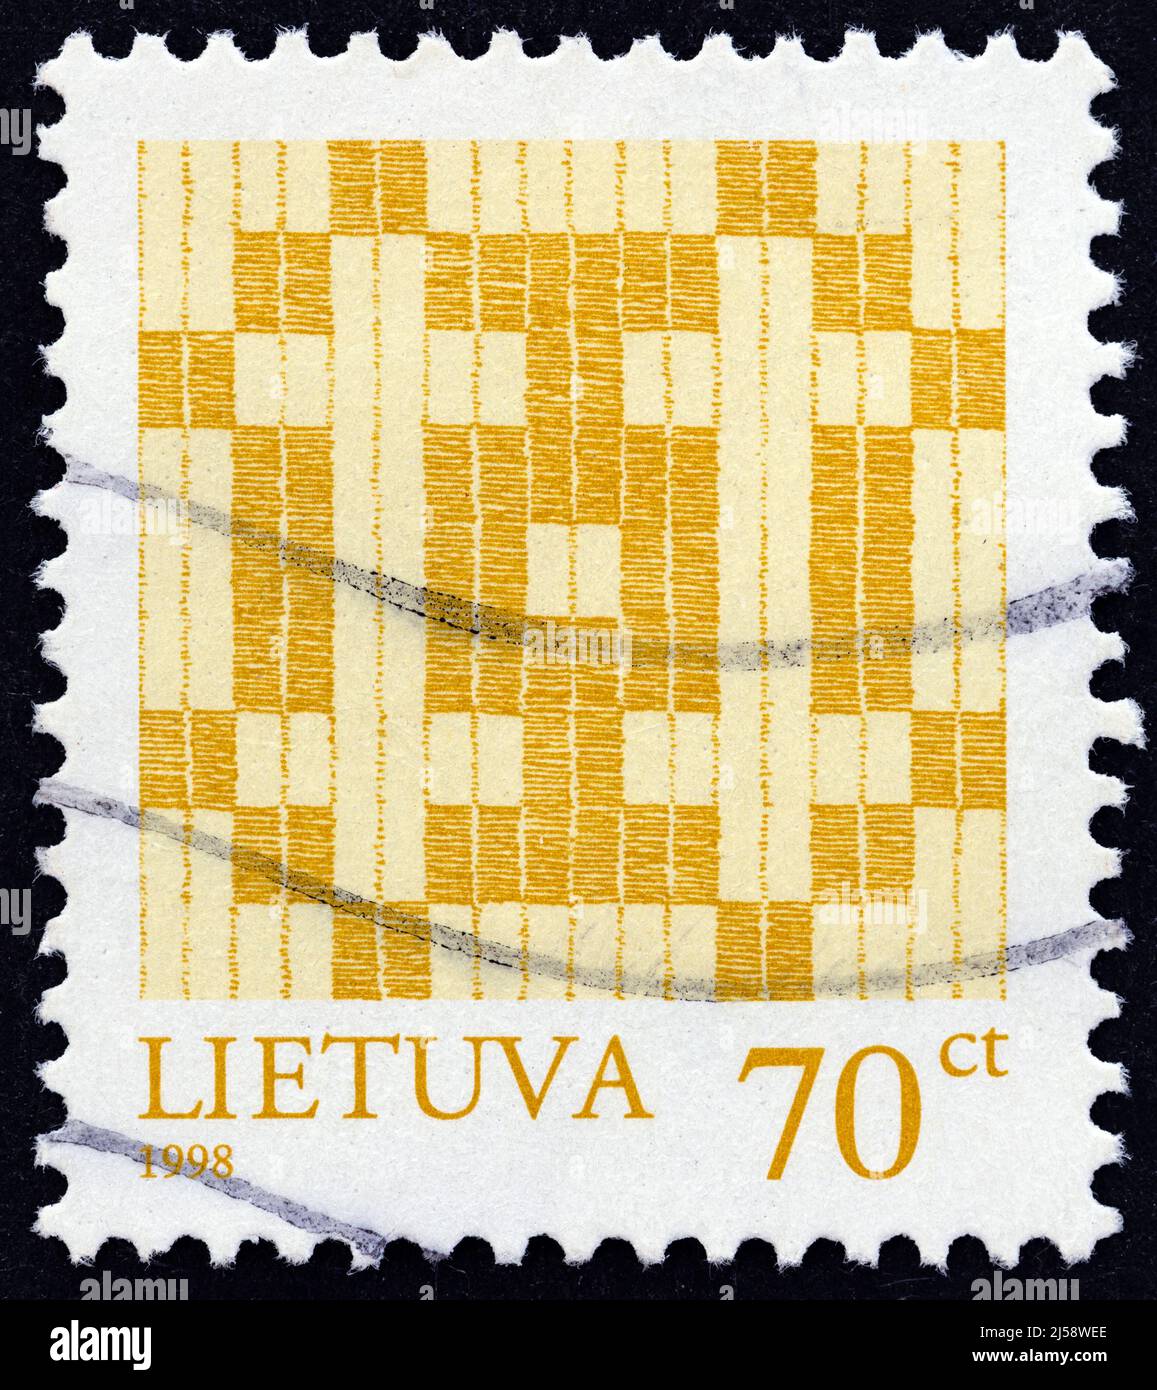 LITHUANIA - CIRCA 1998: A stamp printed in Lithuania shows Double Cross, circa 1998. Stock Photo